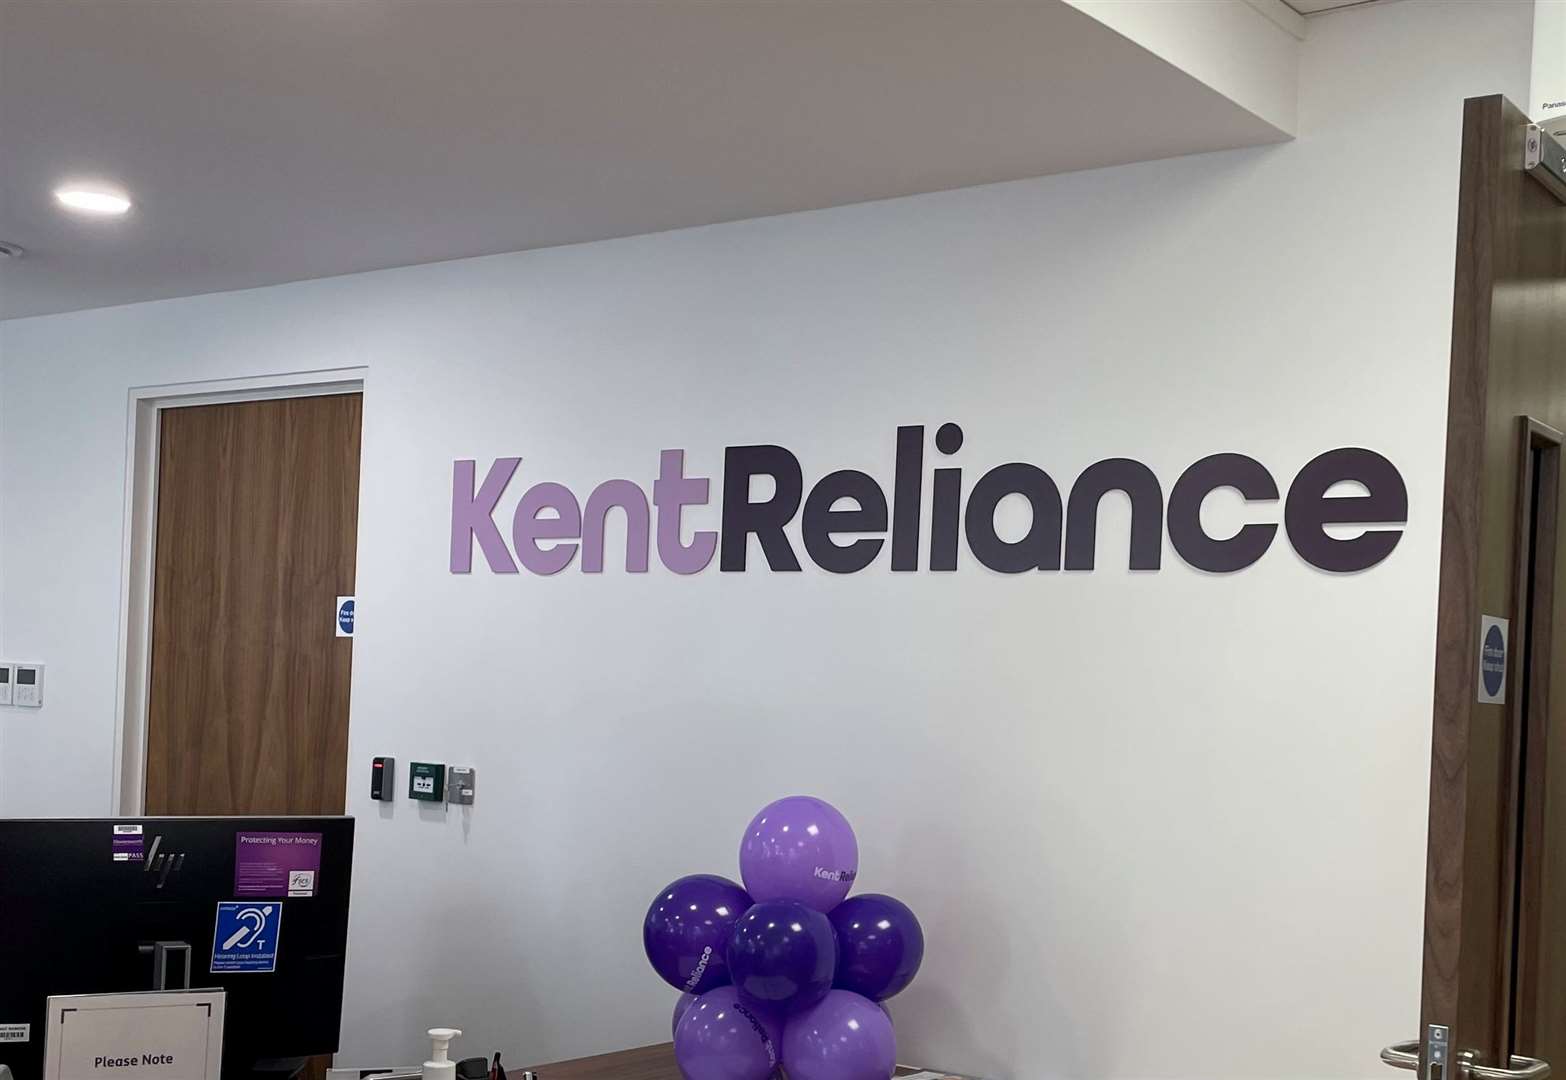 Kent Reliance has opened a bigger branch in a more central location